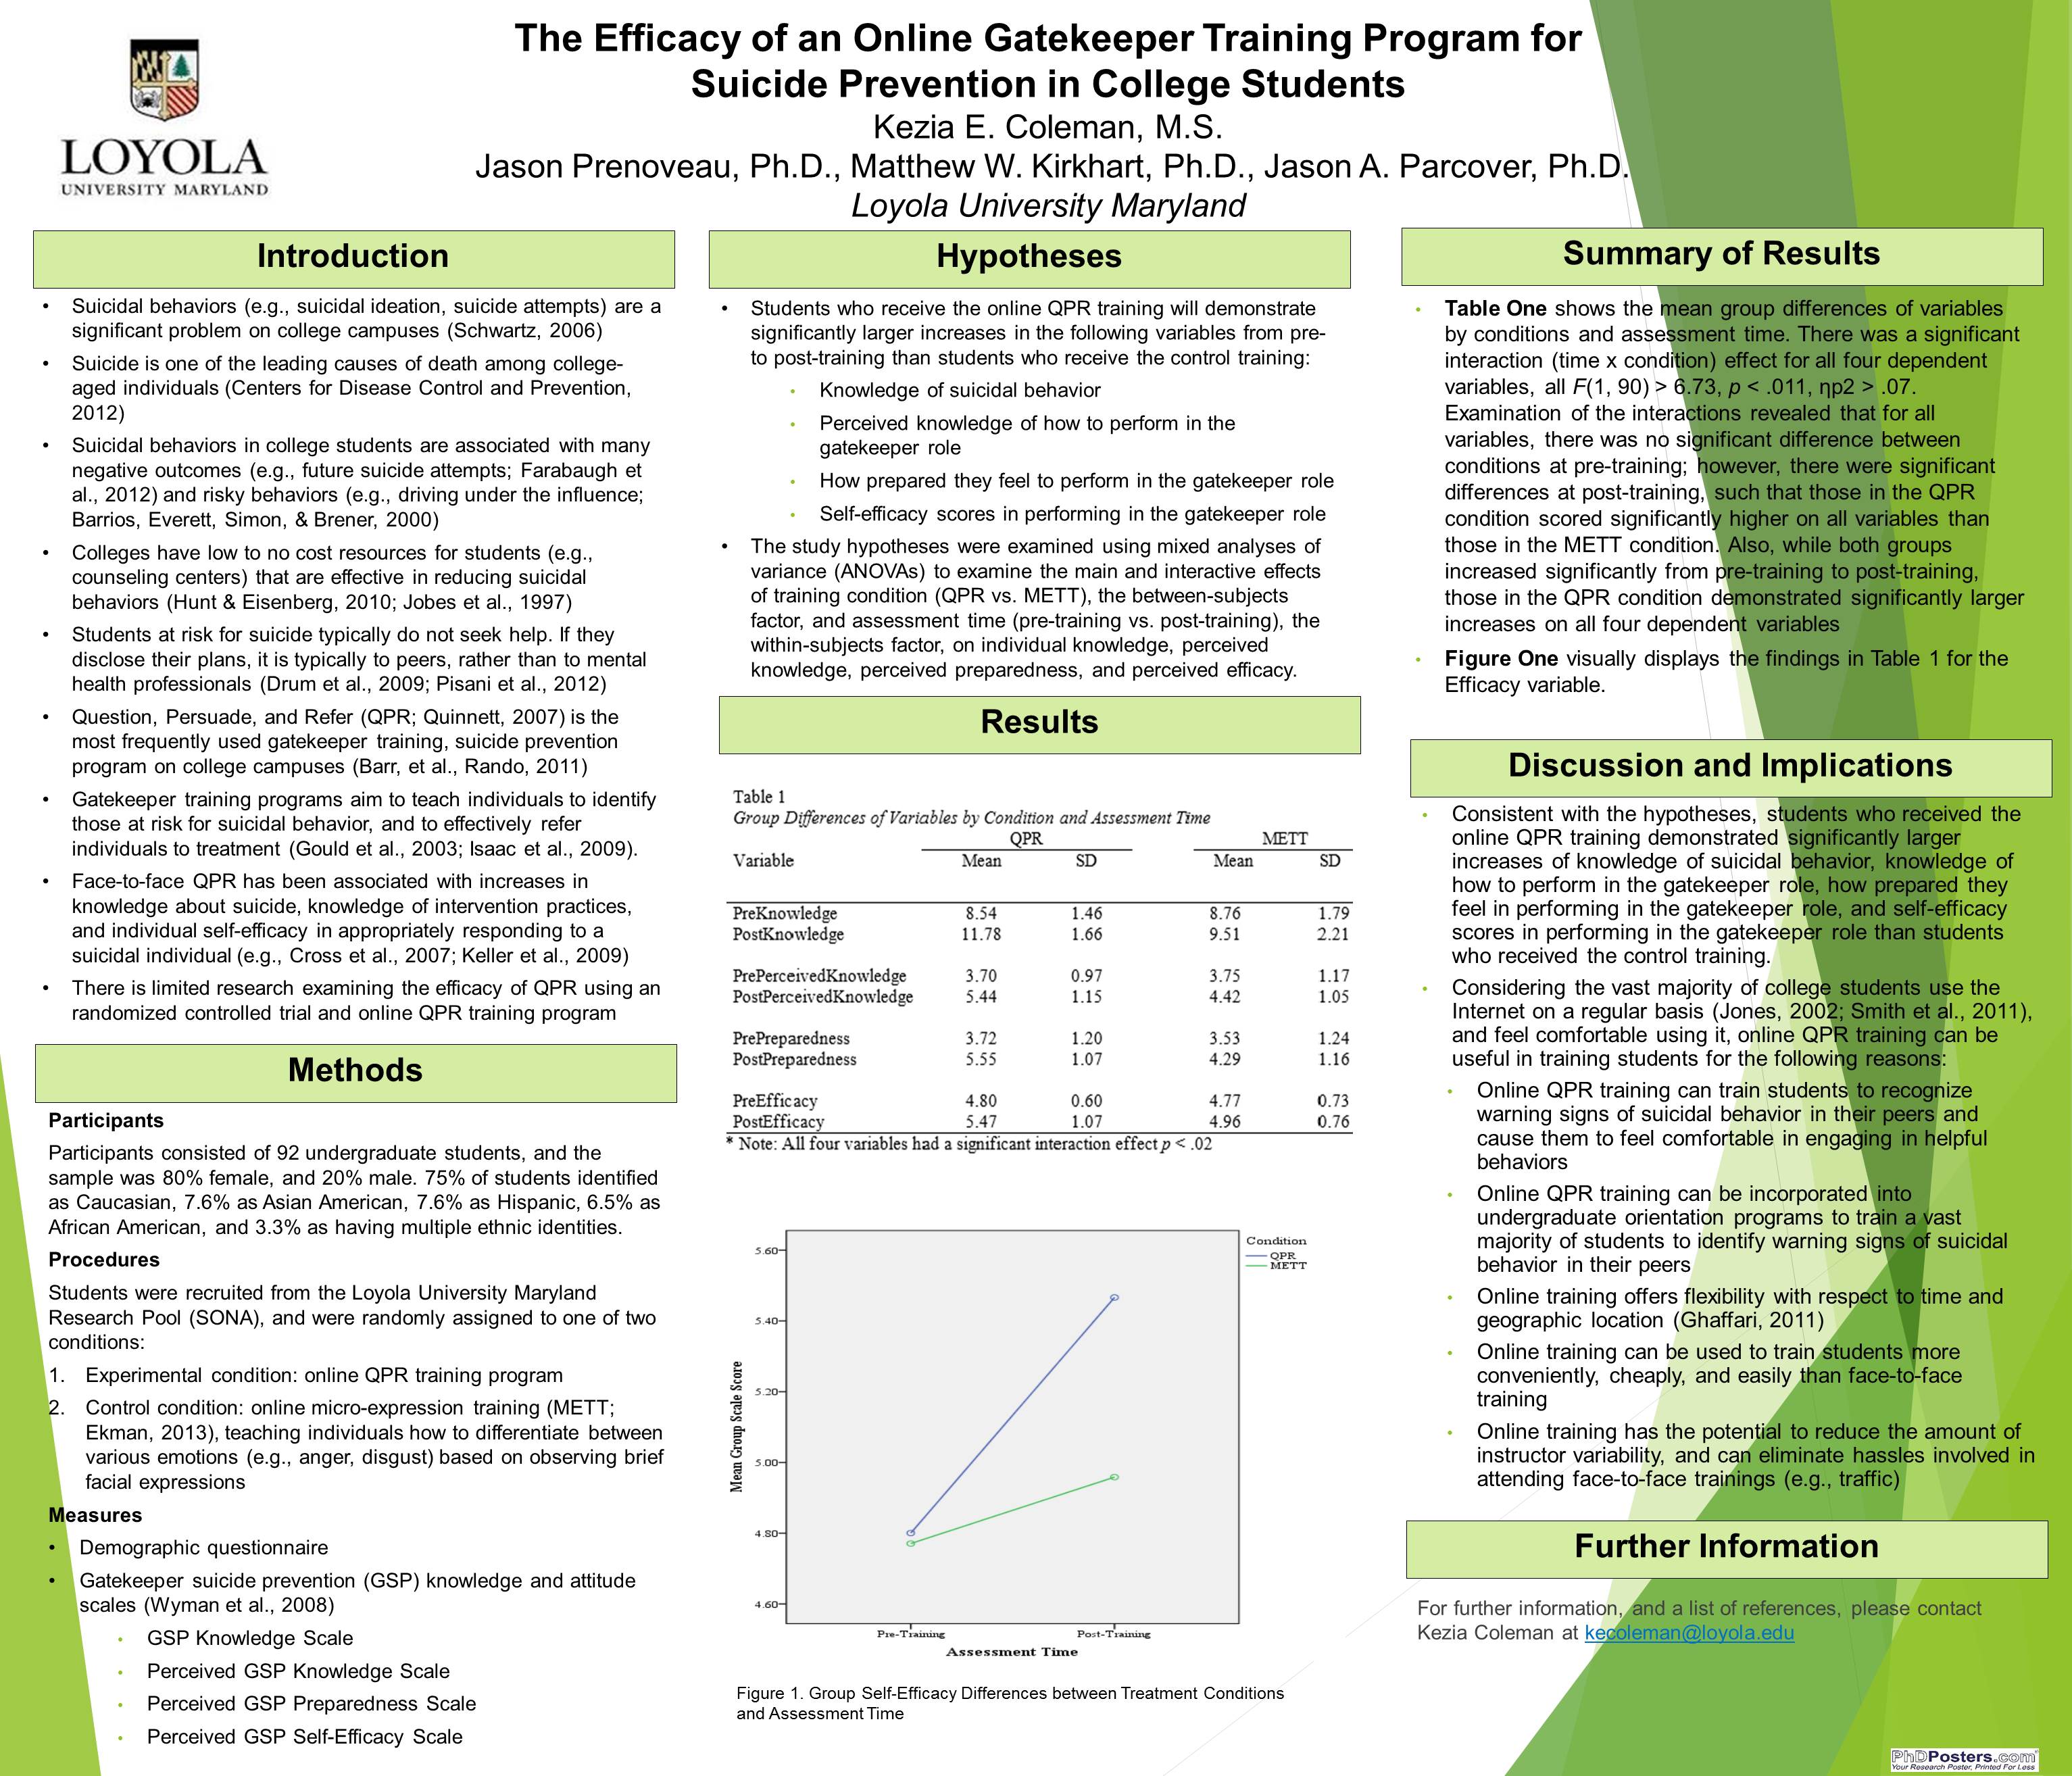 poster image: 'The Efficacy of an Online Gatekeeper Training Program for Suicide Prevention in College Students'